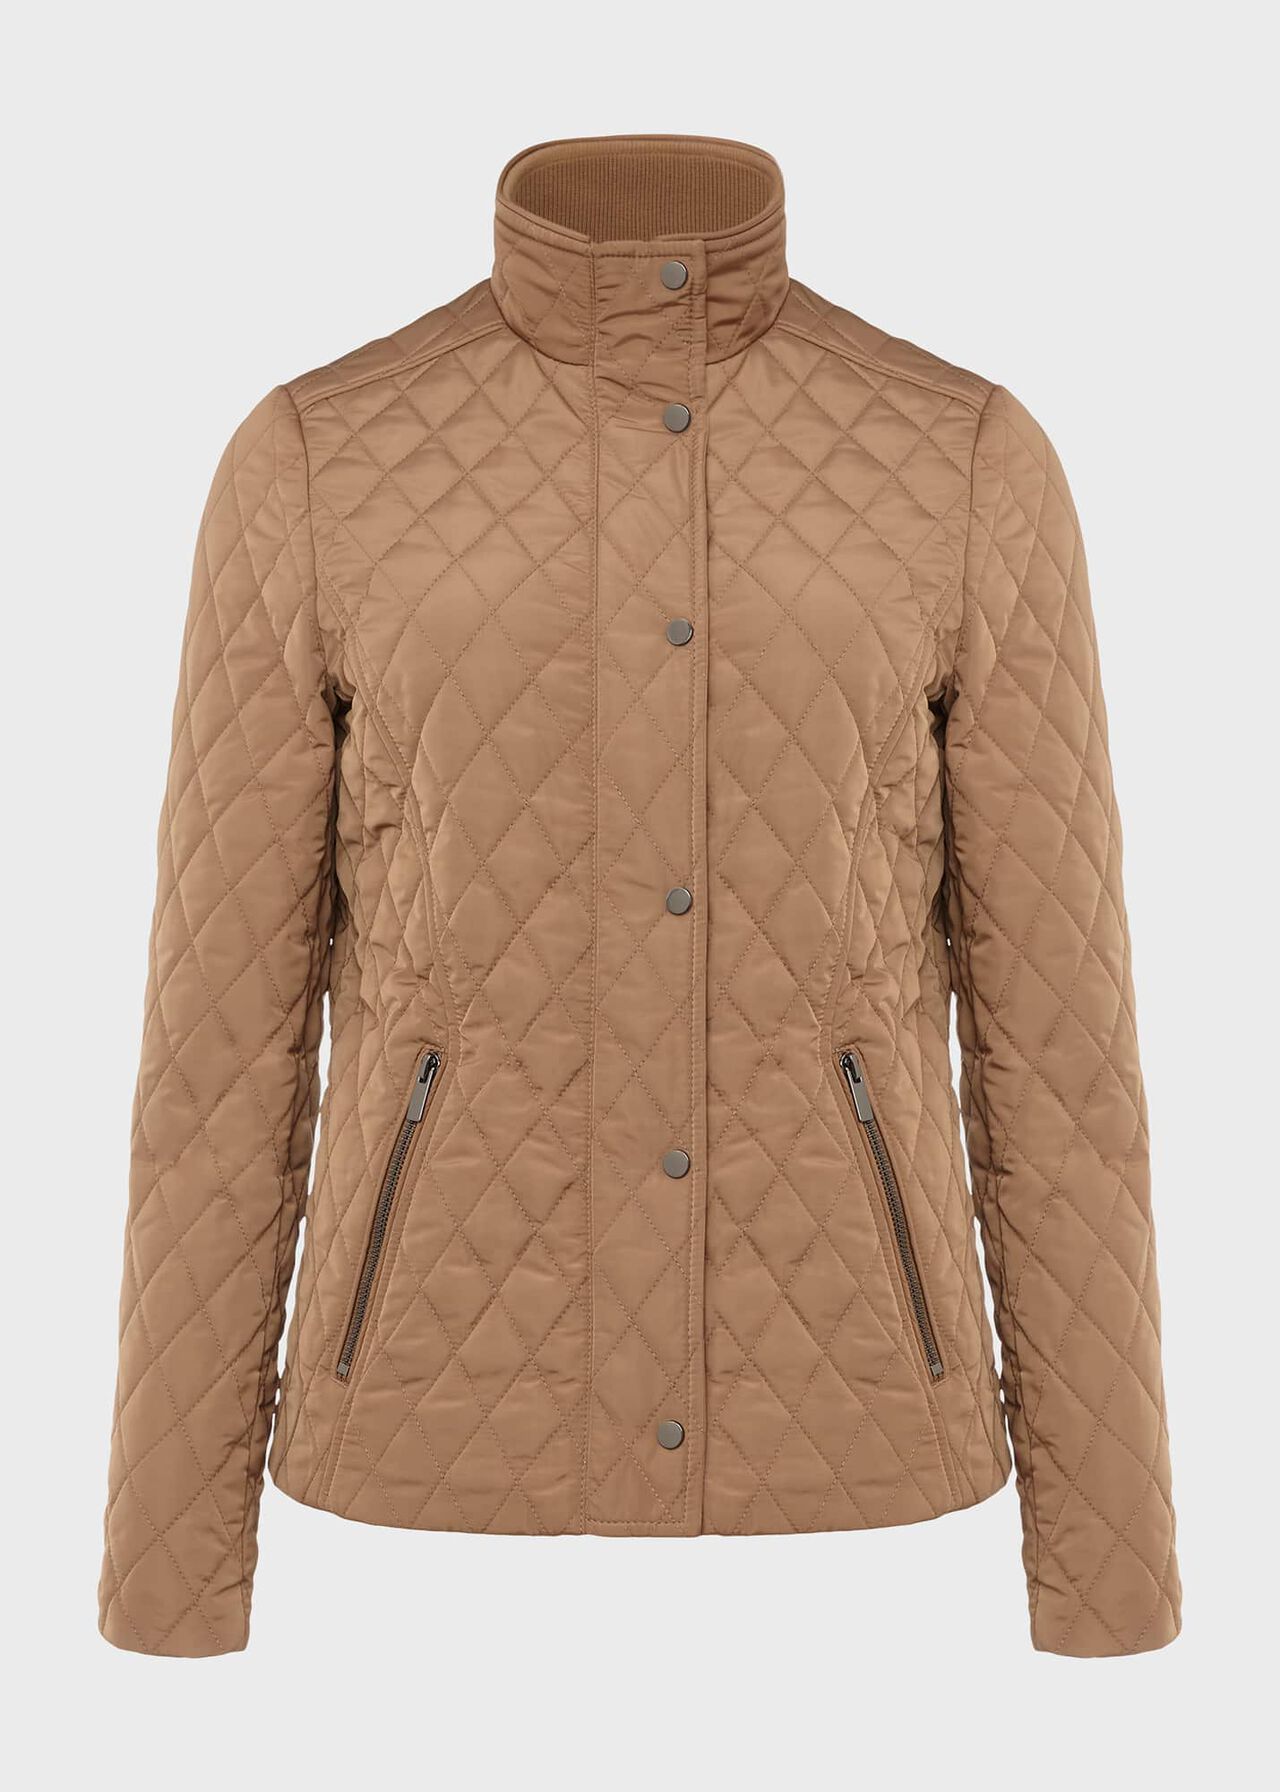 Thandie Quilted Jacket, Camel, hi-res